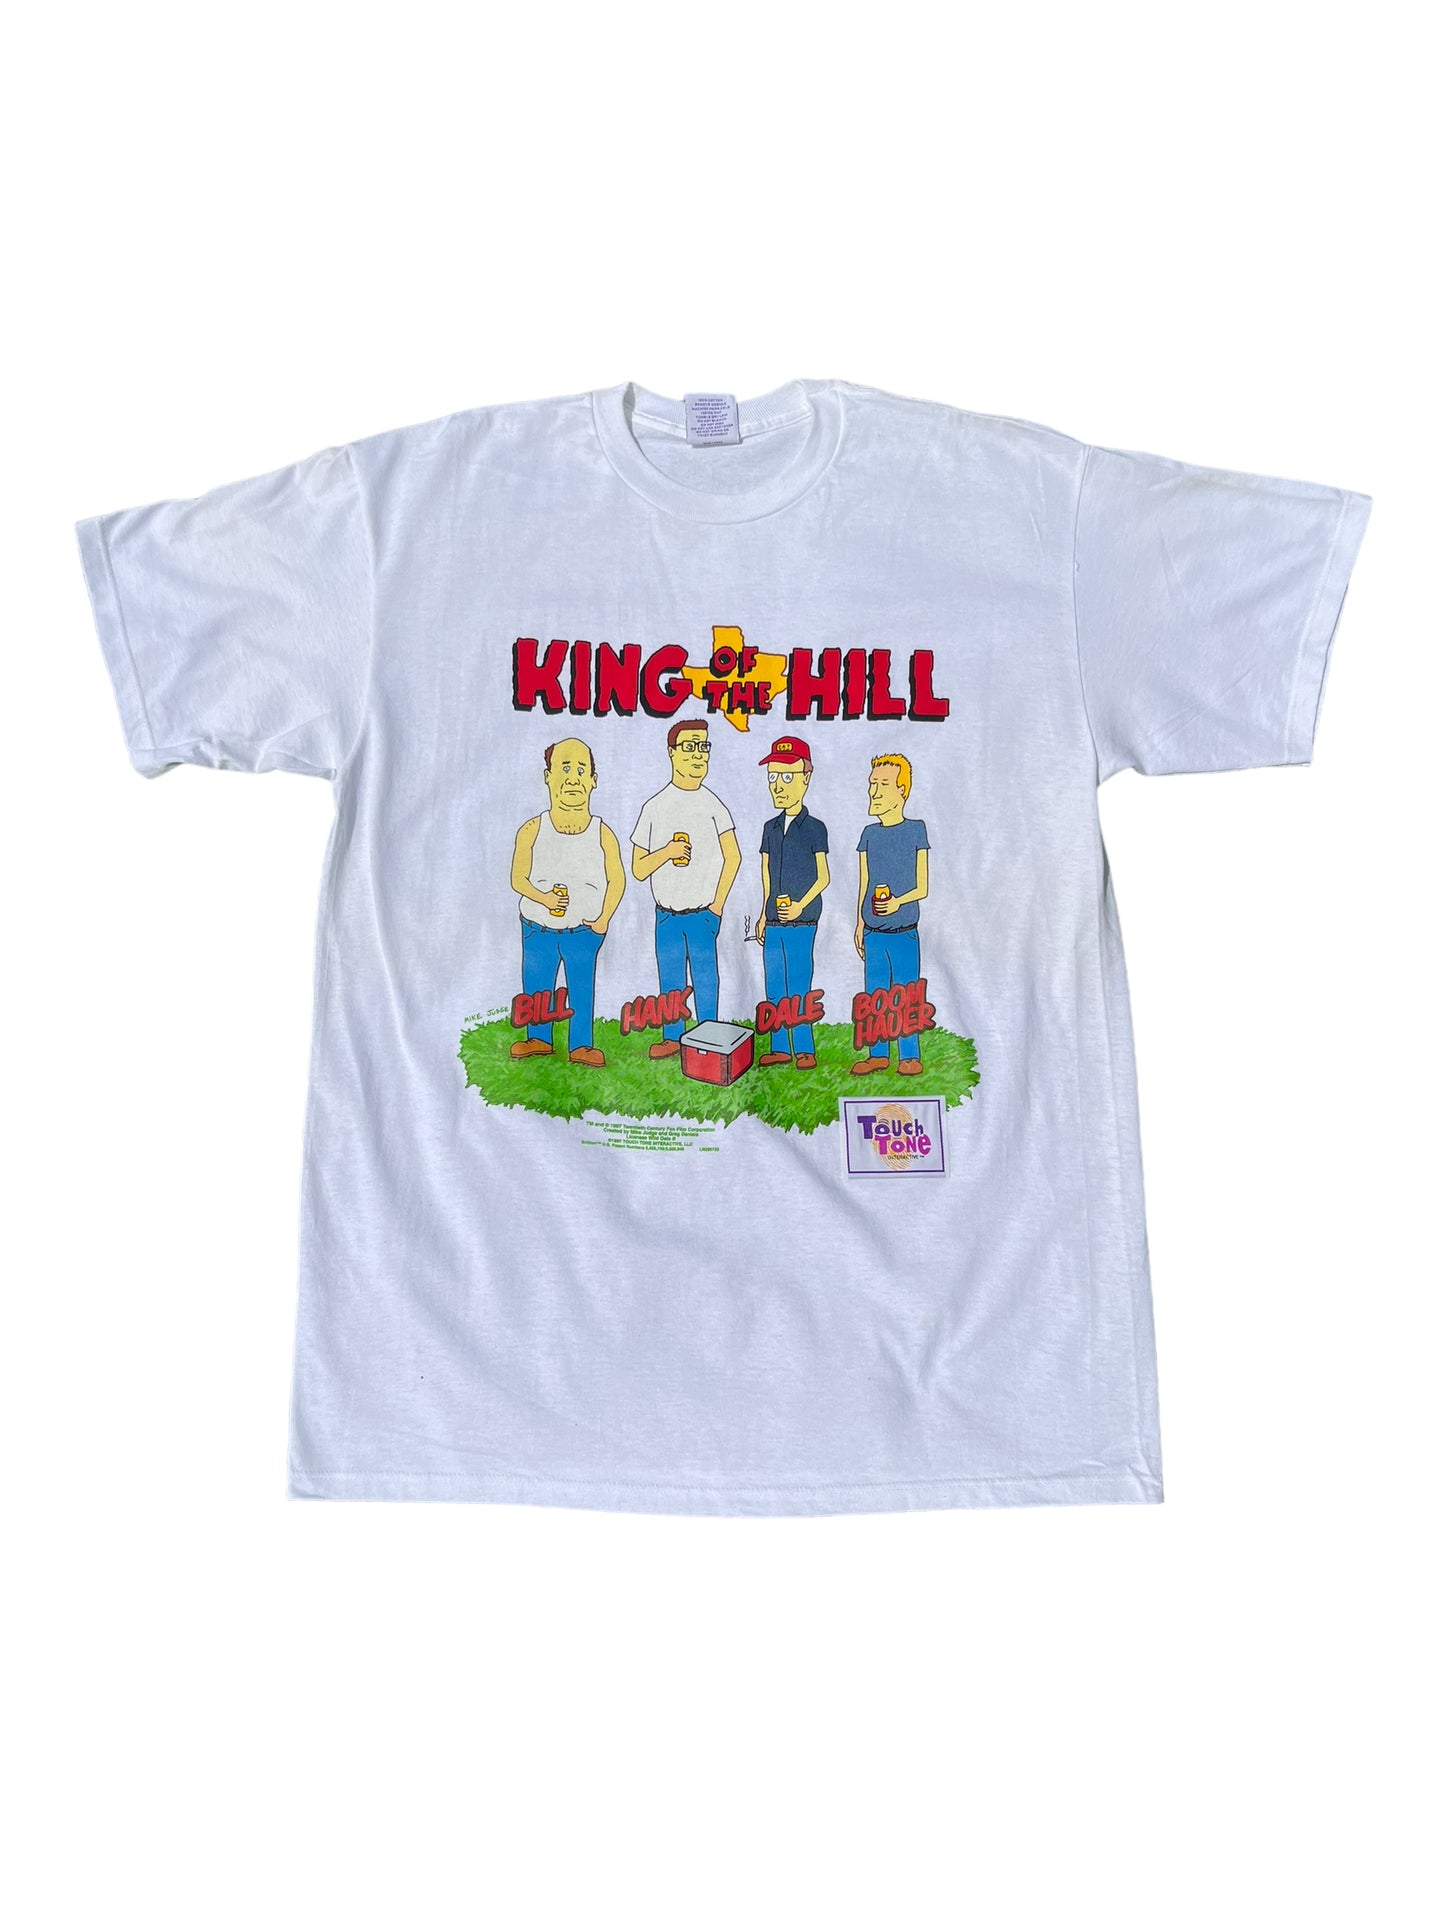 (XL) 1997 Brand New King of the Hill Tee